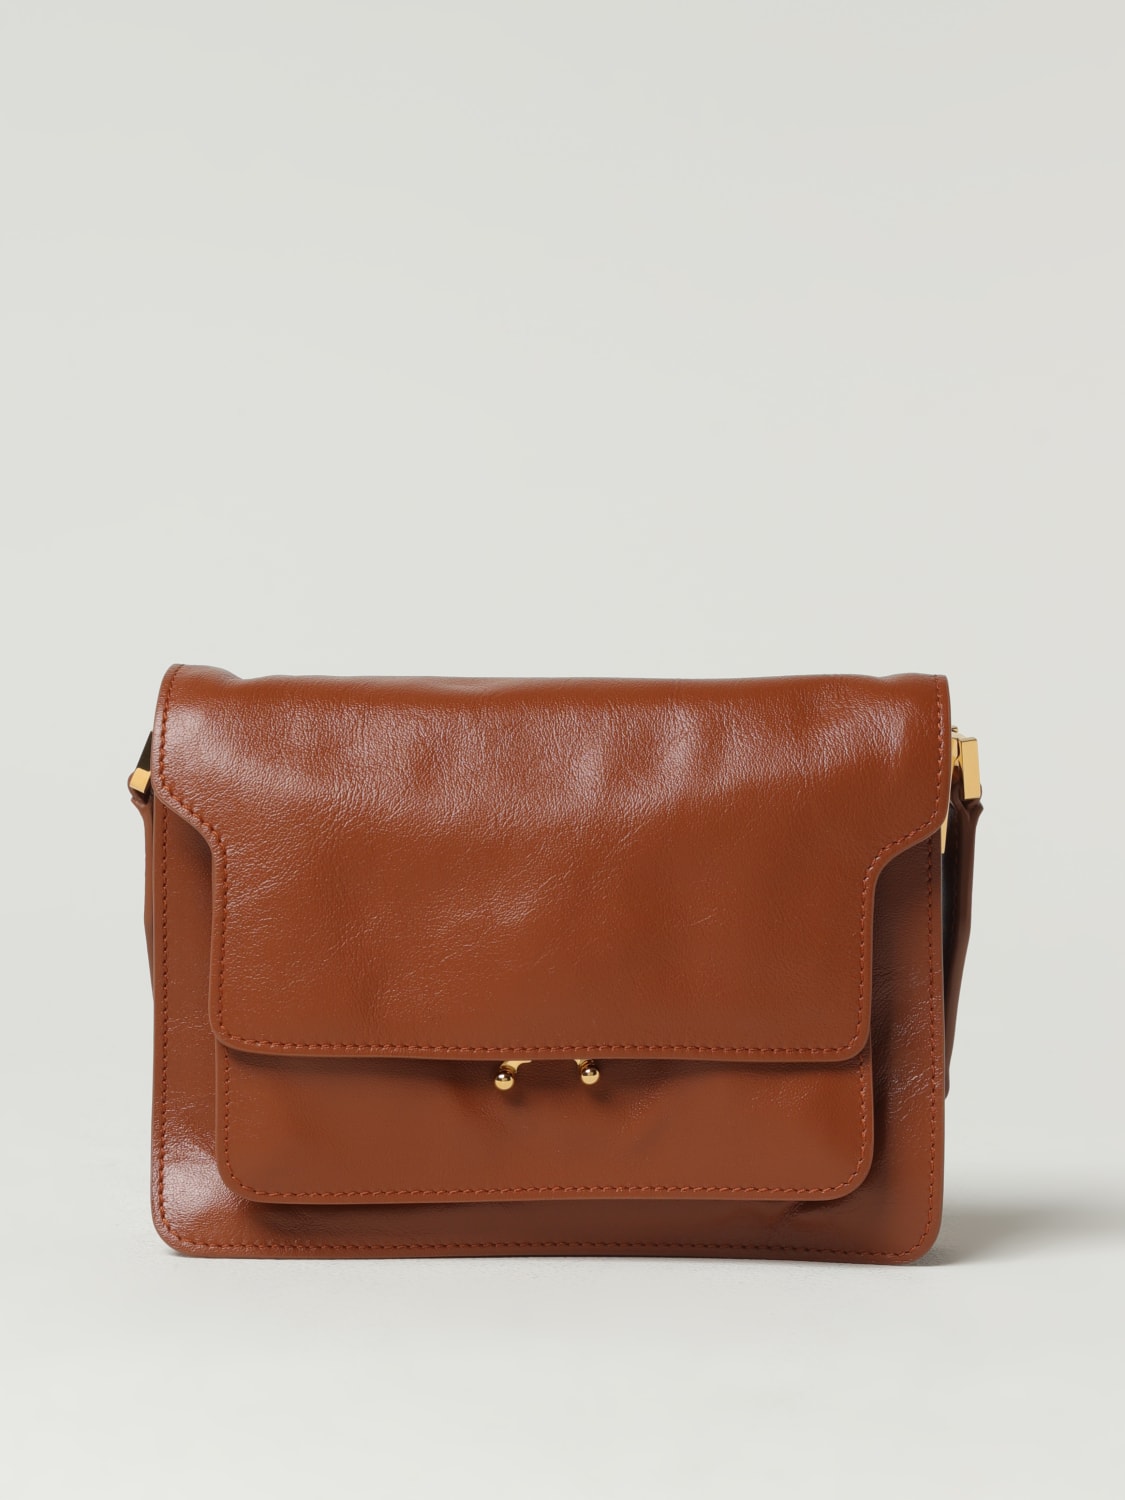 Trunk Soft E W Leather Shoulder Bag in Brown - Marni